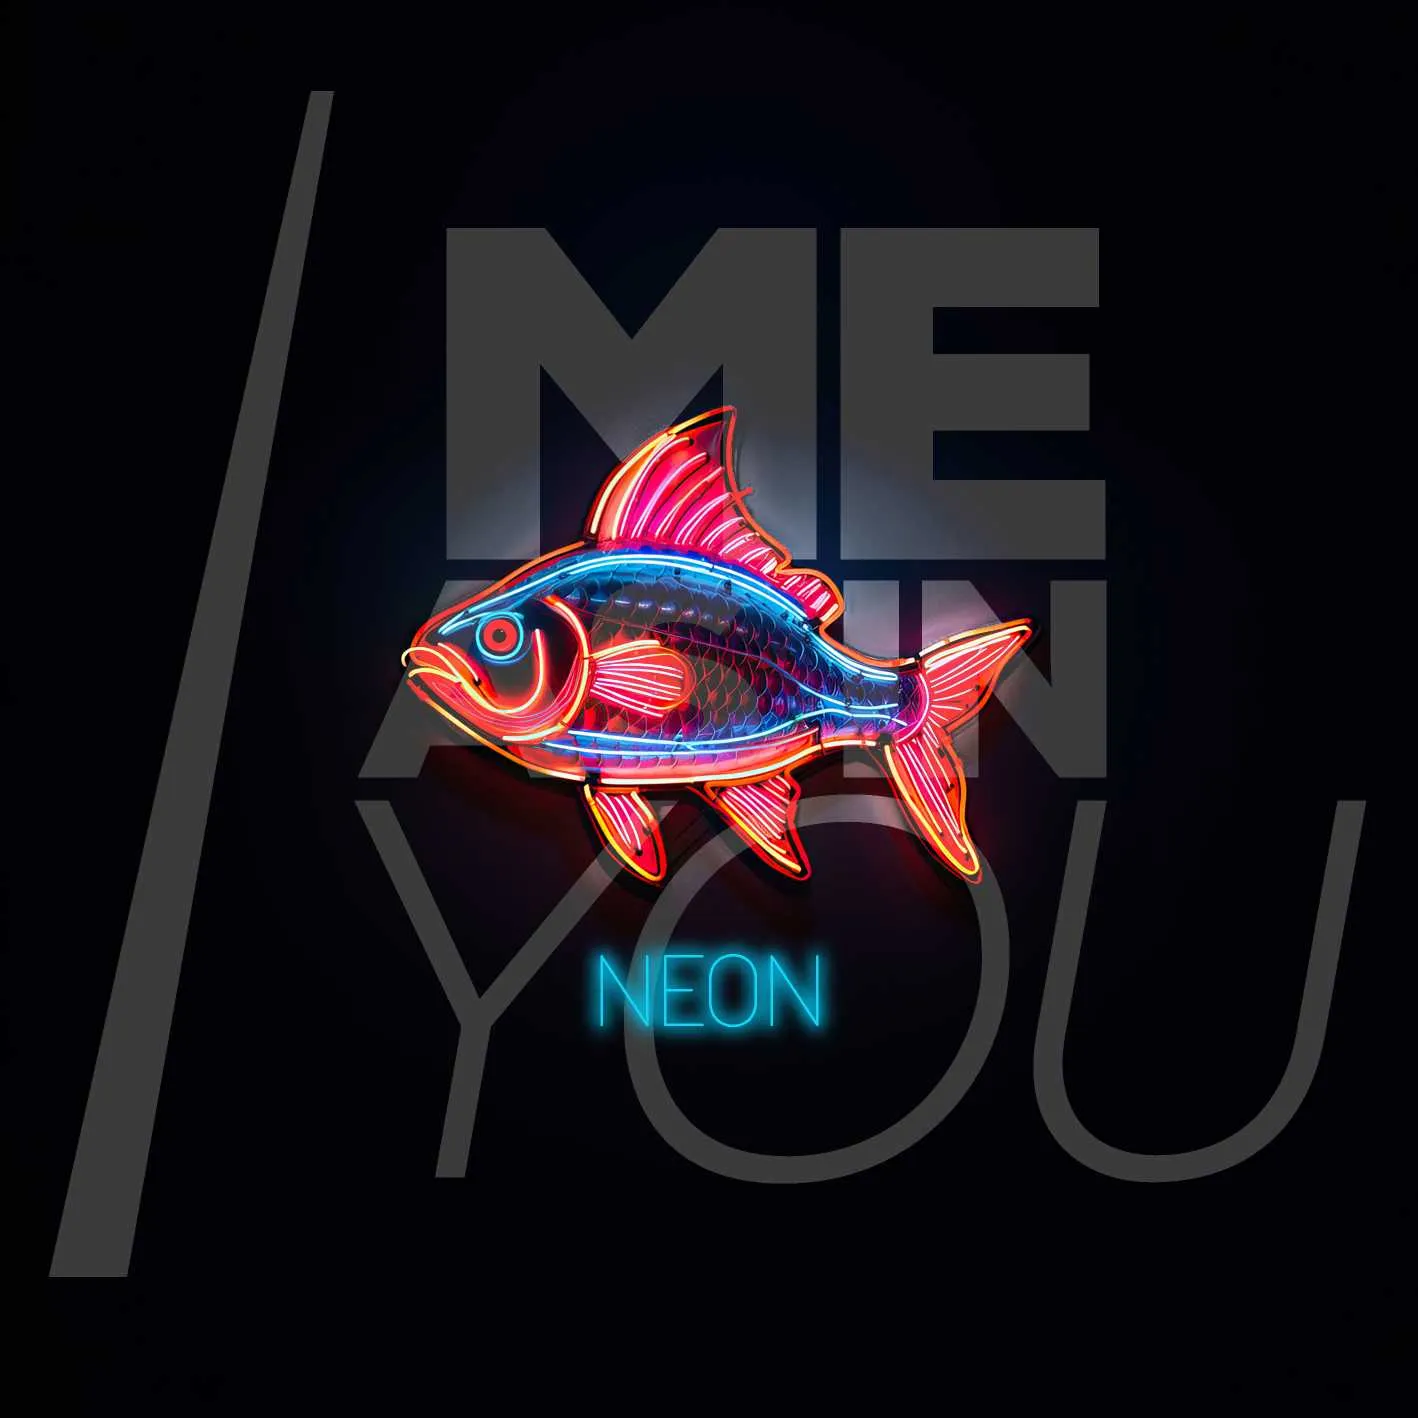 Album cover for “Neon” by Me As In You